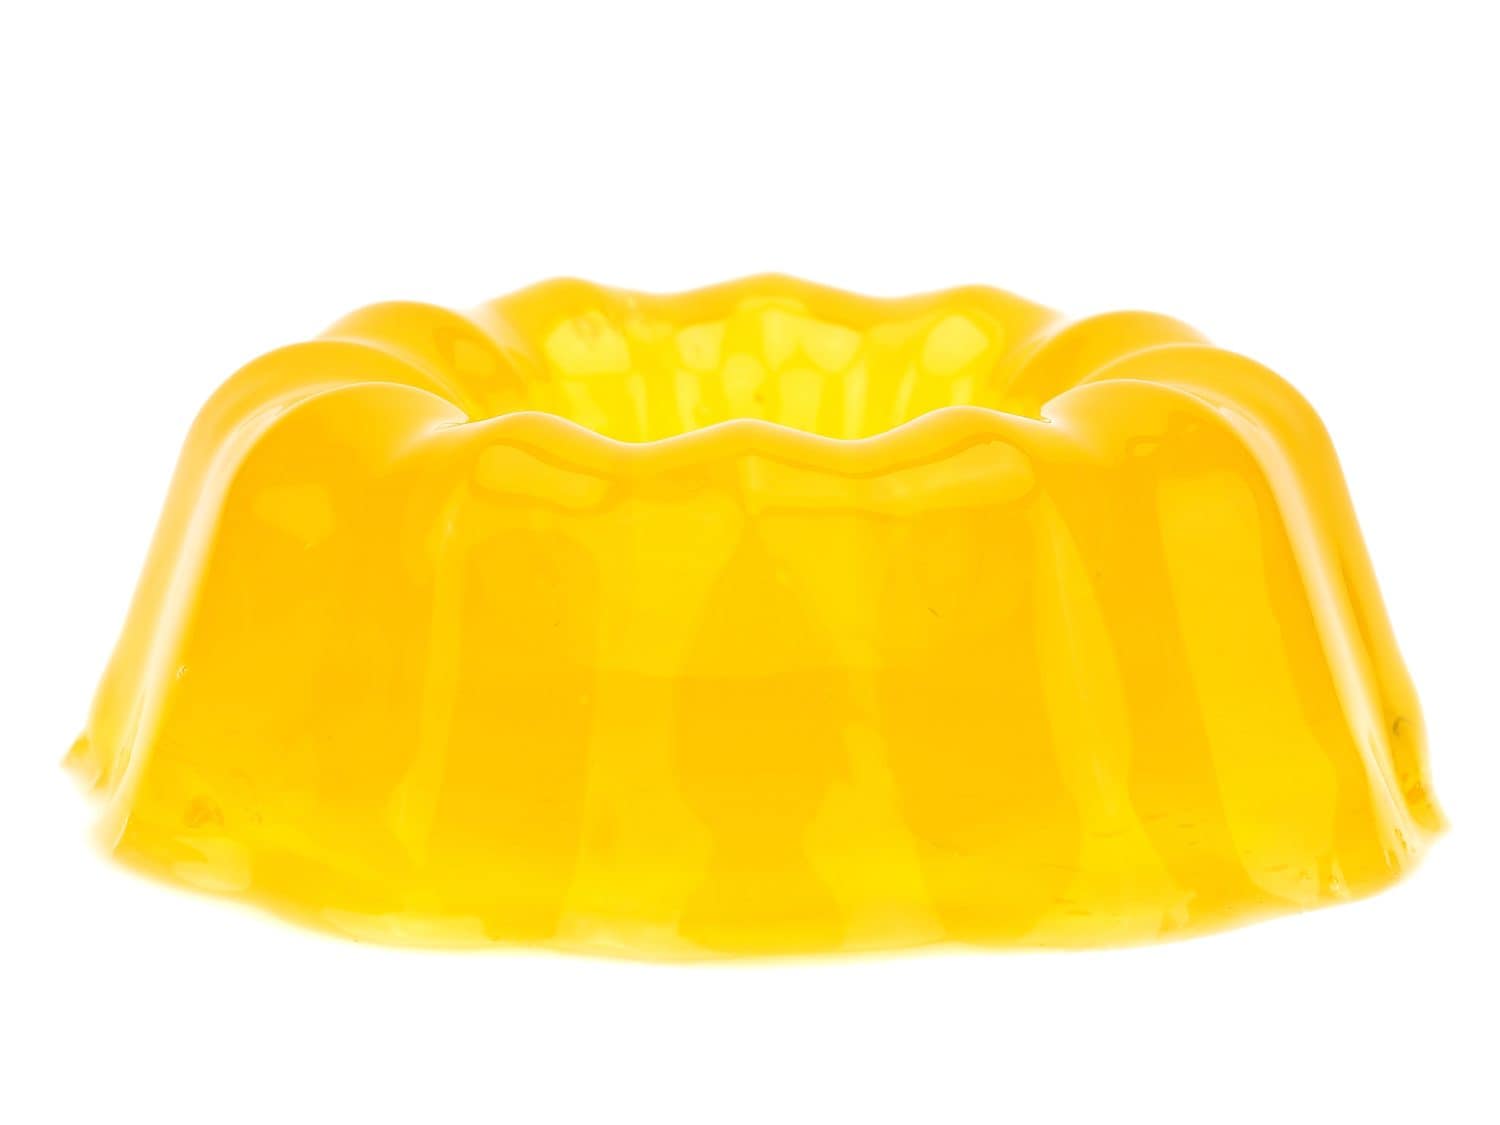 Yellow peach jelly pudding on a white background